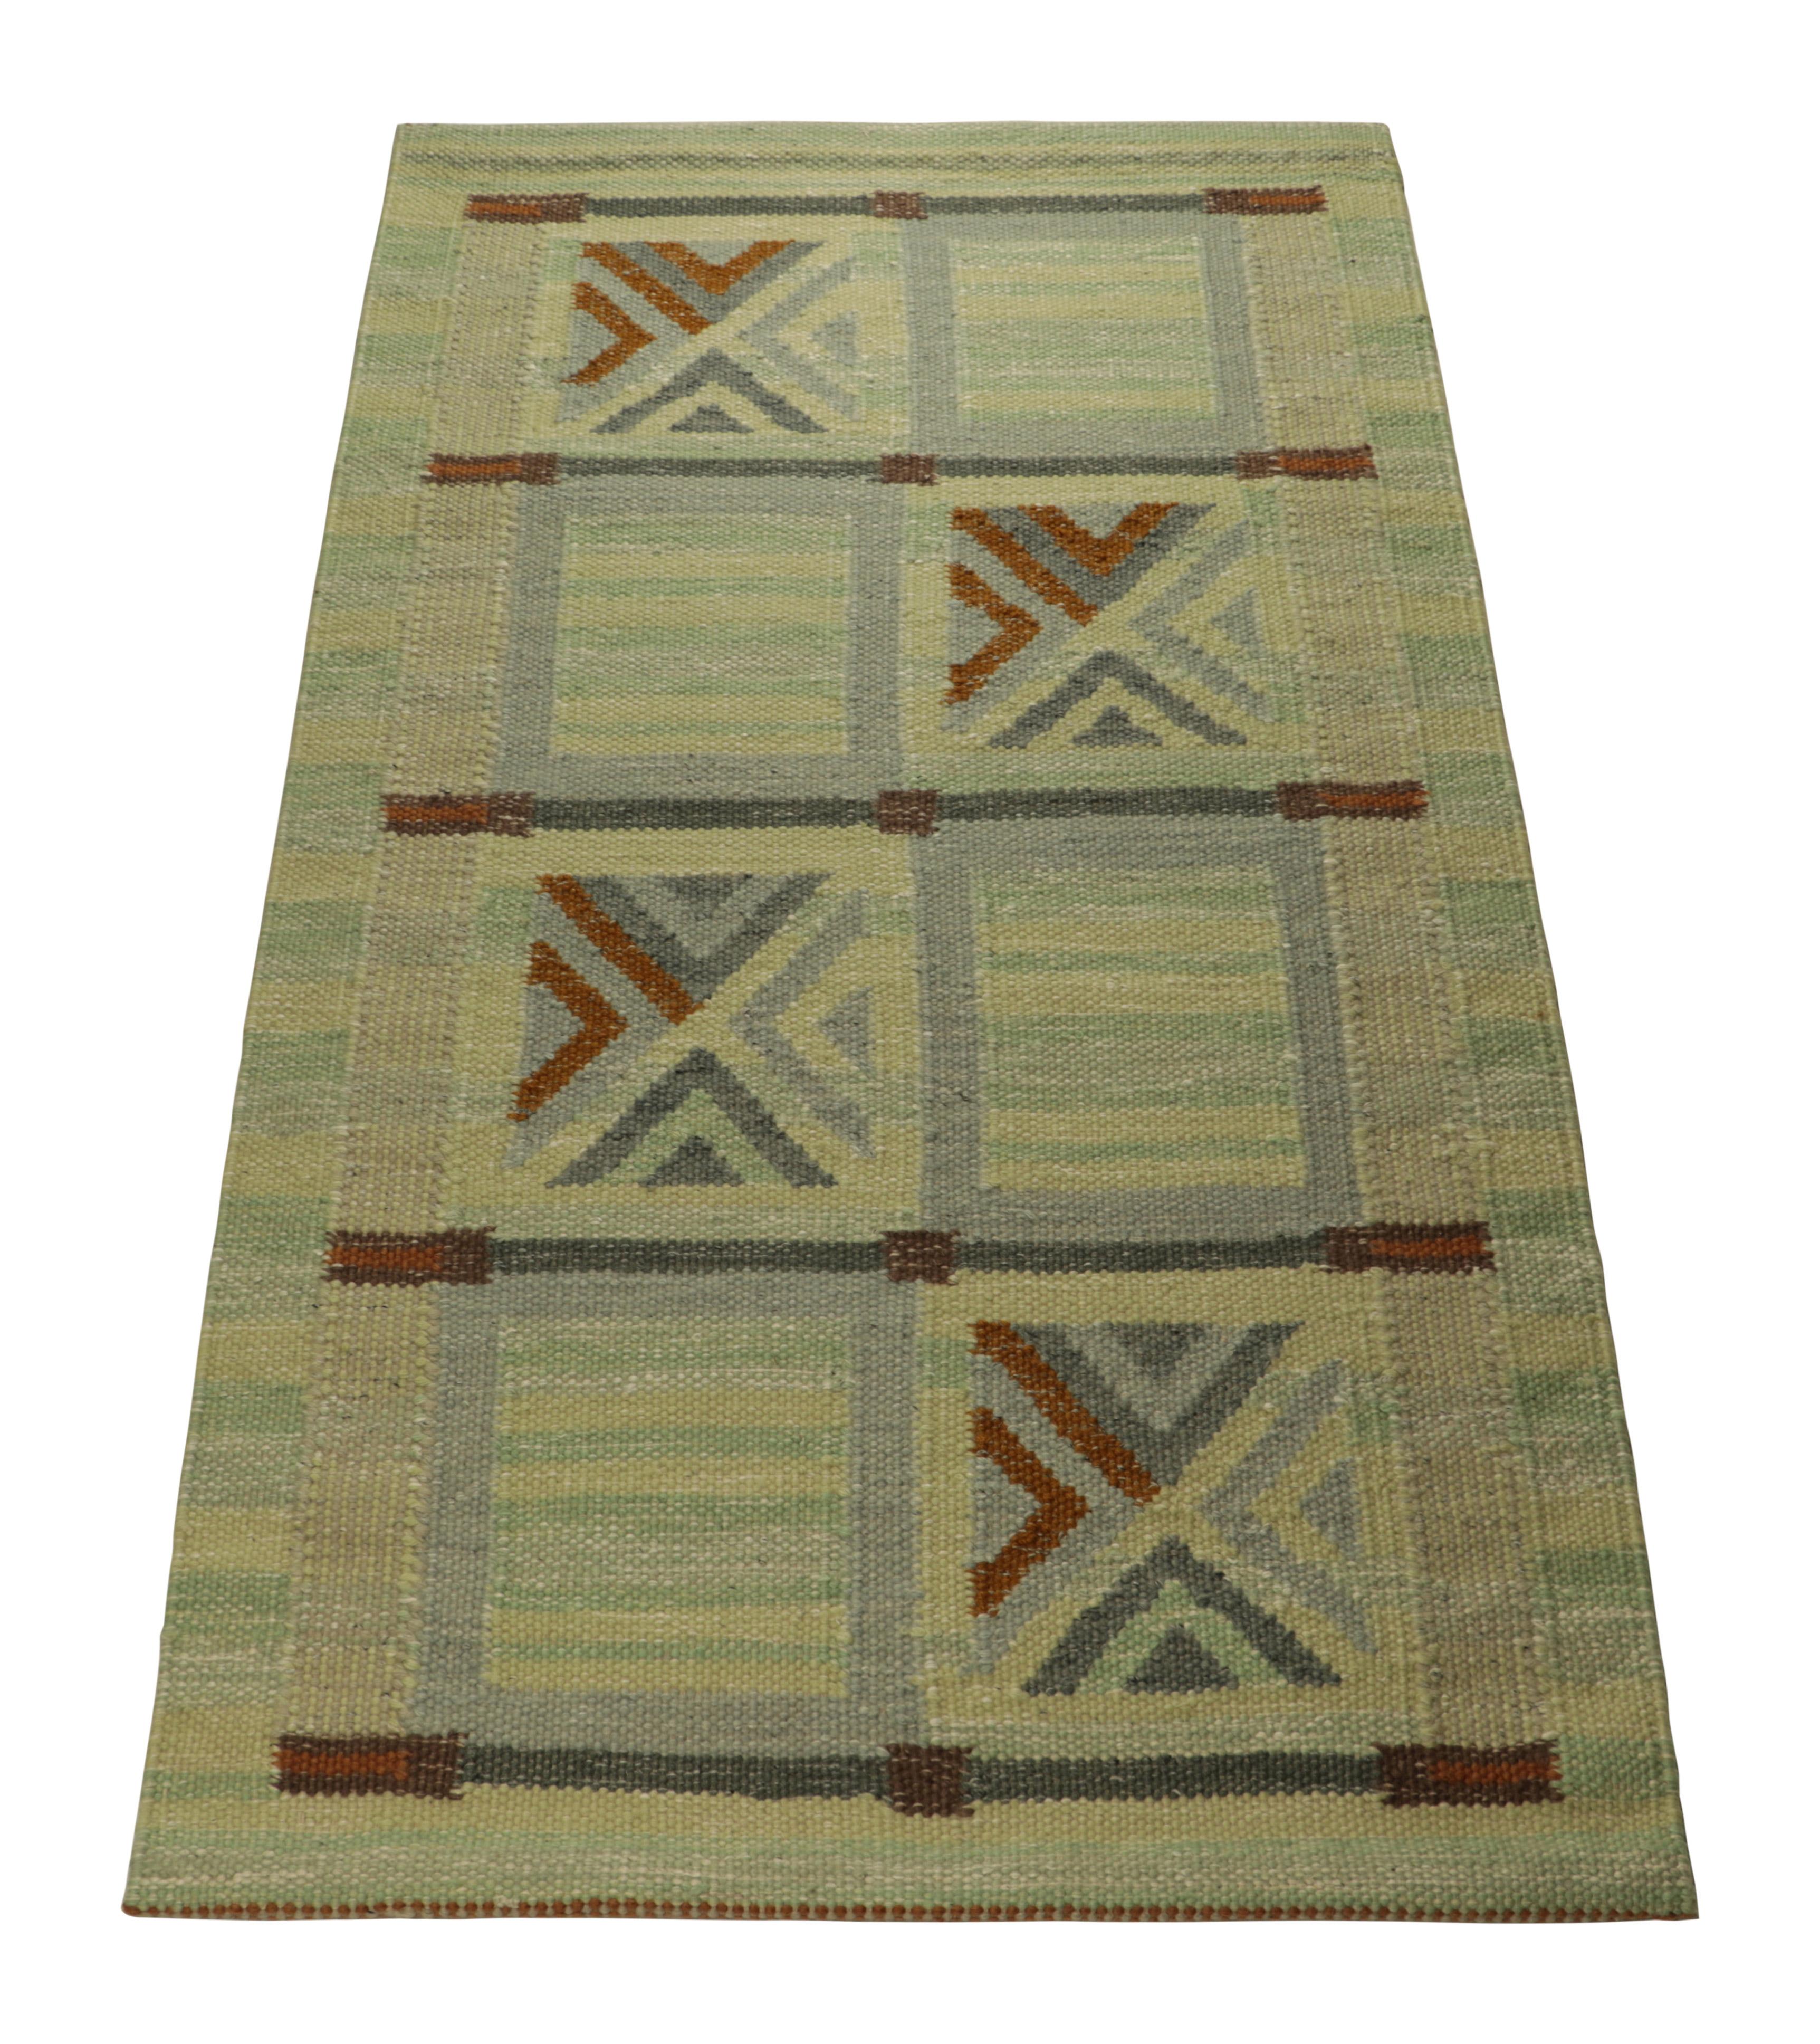 Indian Rug & Kilim’s Scandinavian Style Rug in Blue Tones, with Geometric Patterns For Sale